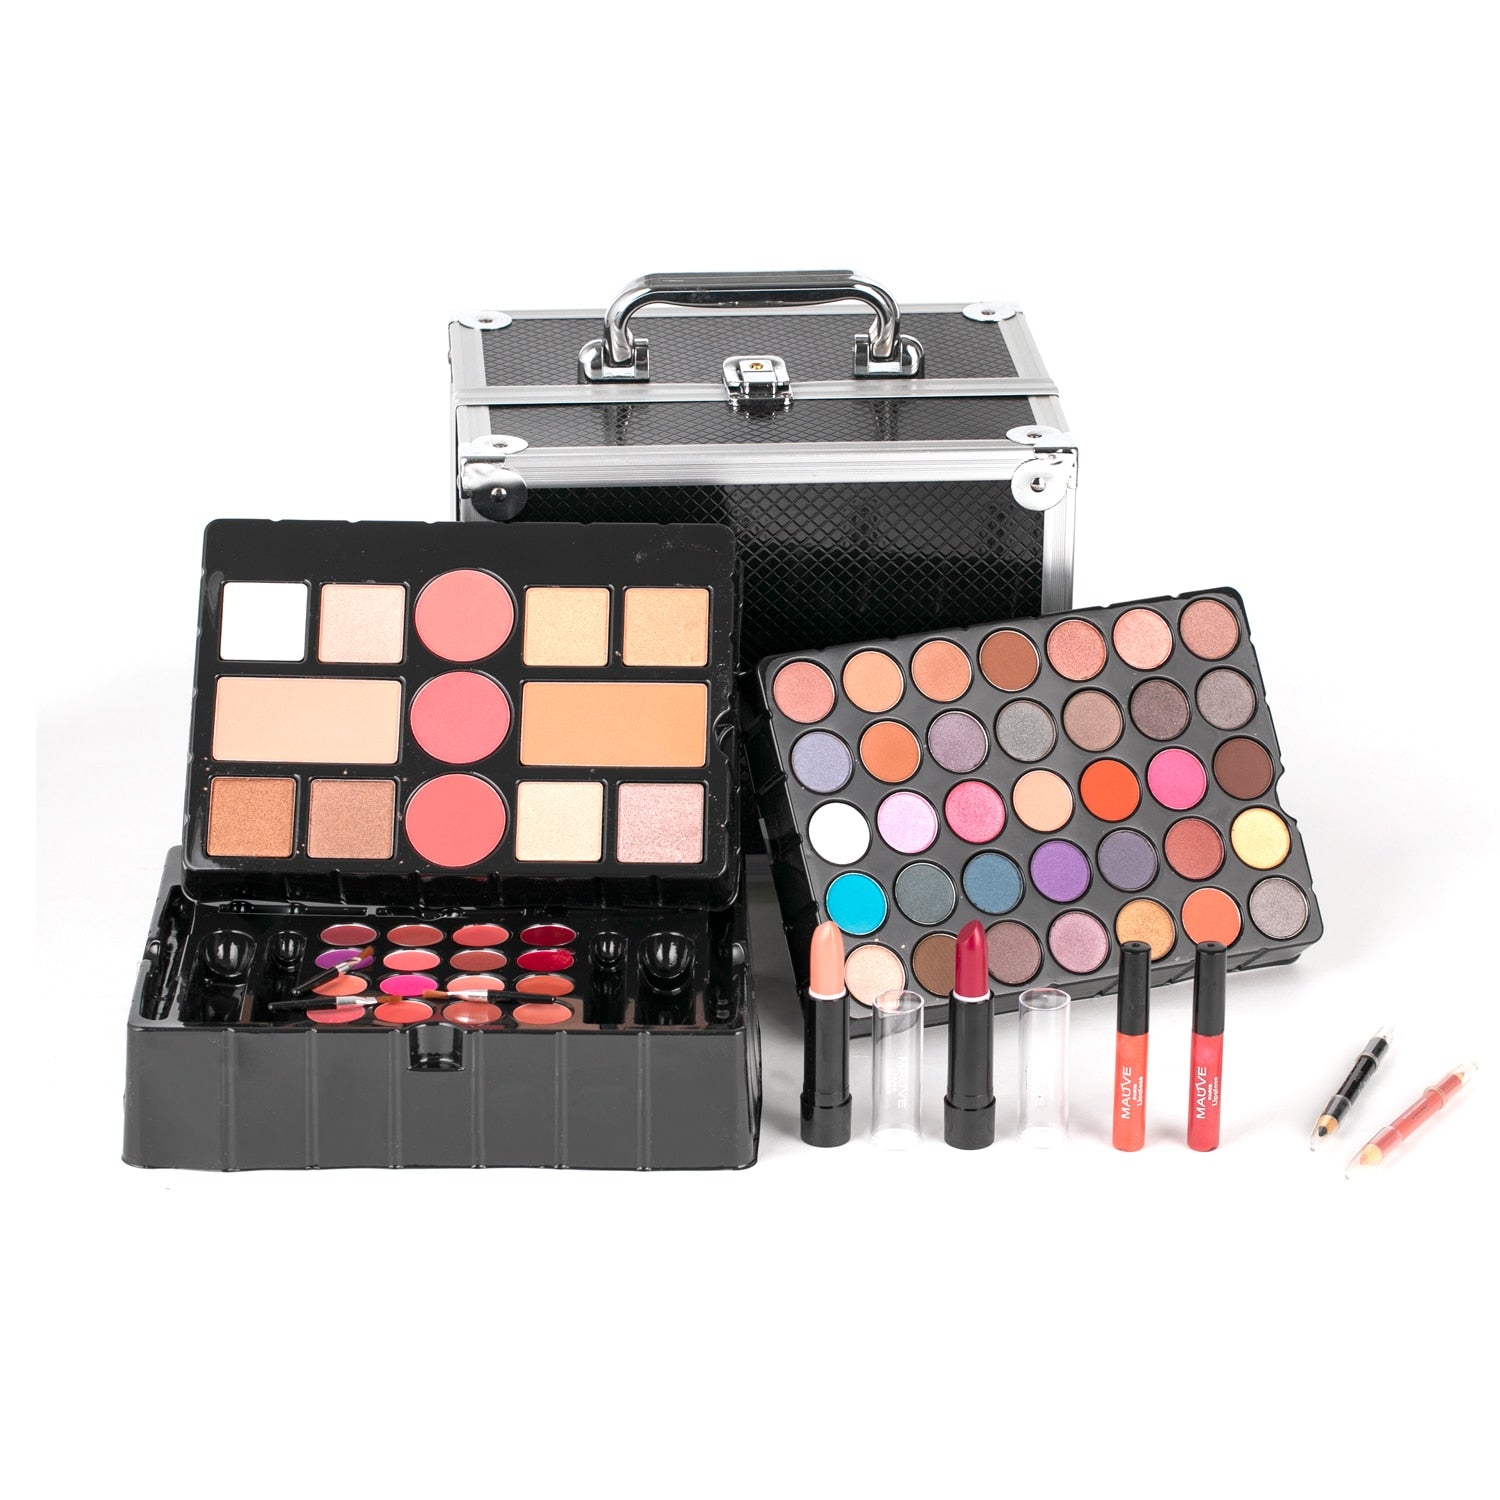 Portable Professional 35 Color Eyeshadow Blush Cosmetic Foundation Face Powder Makeup Sets Eye Shadows Palette